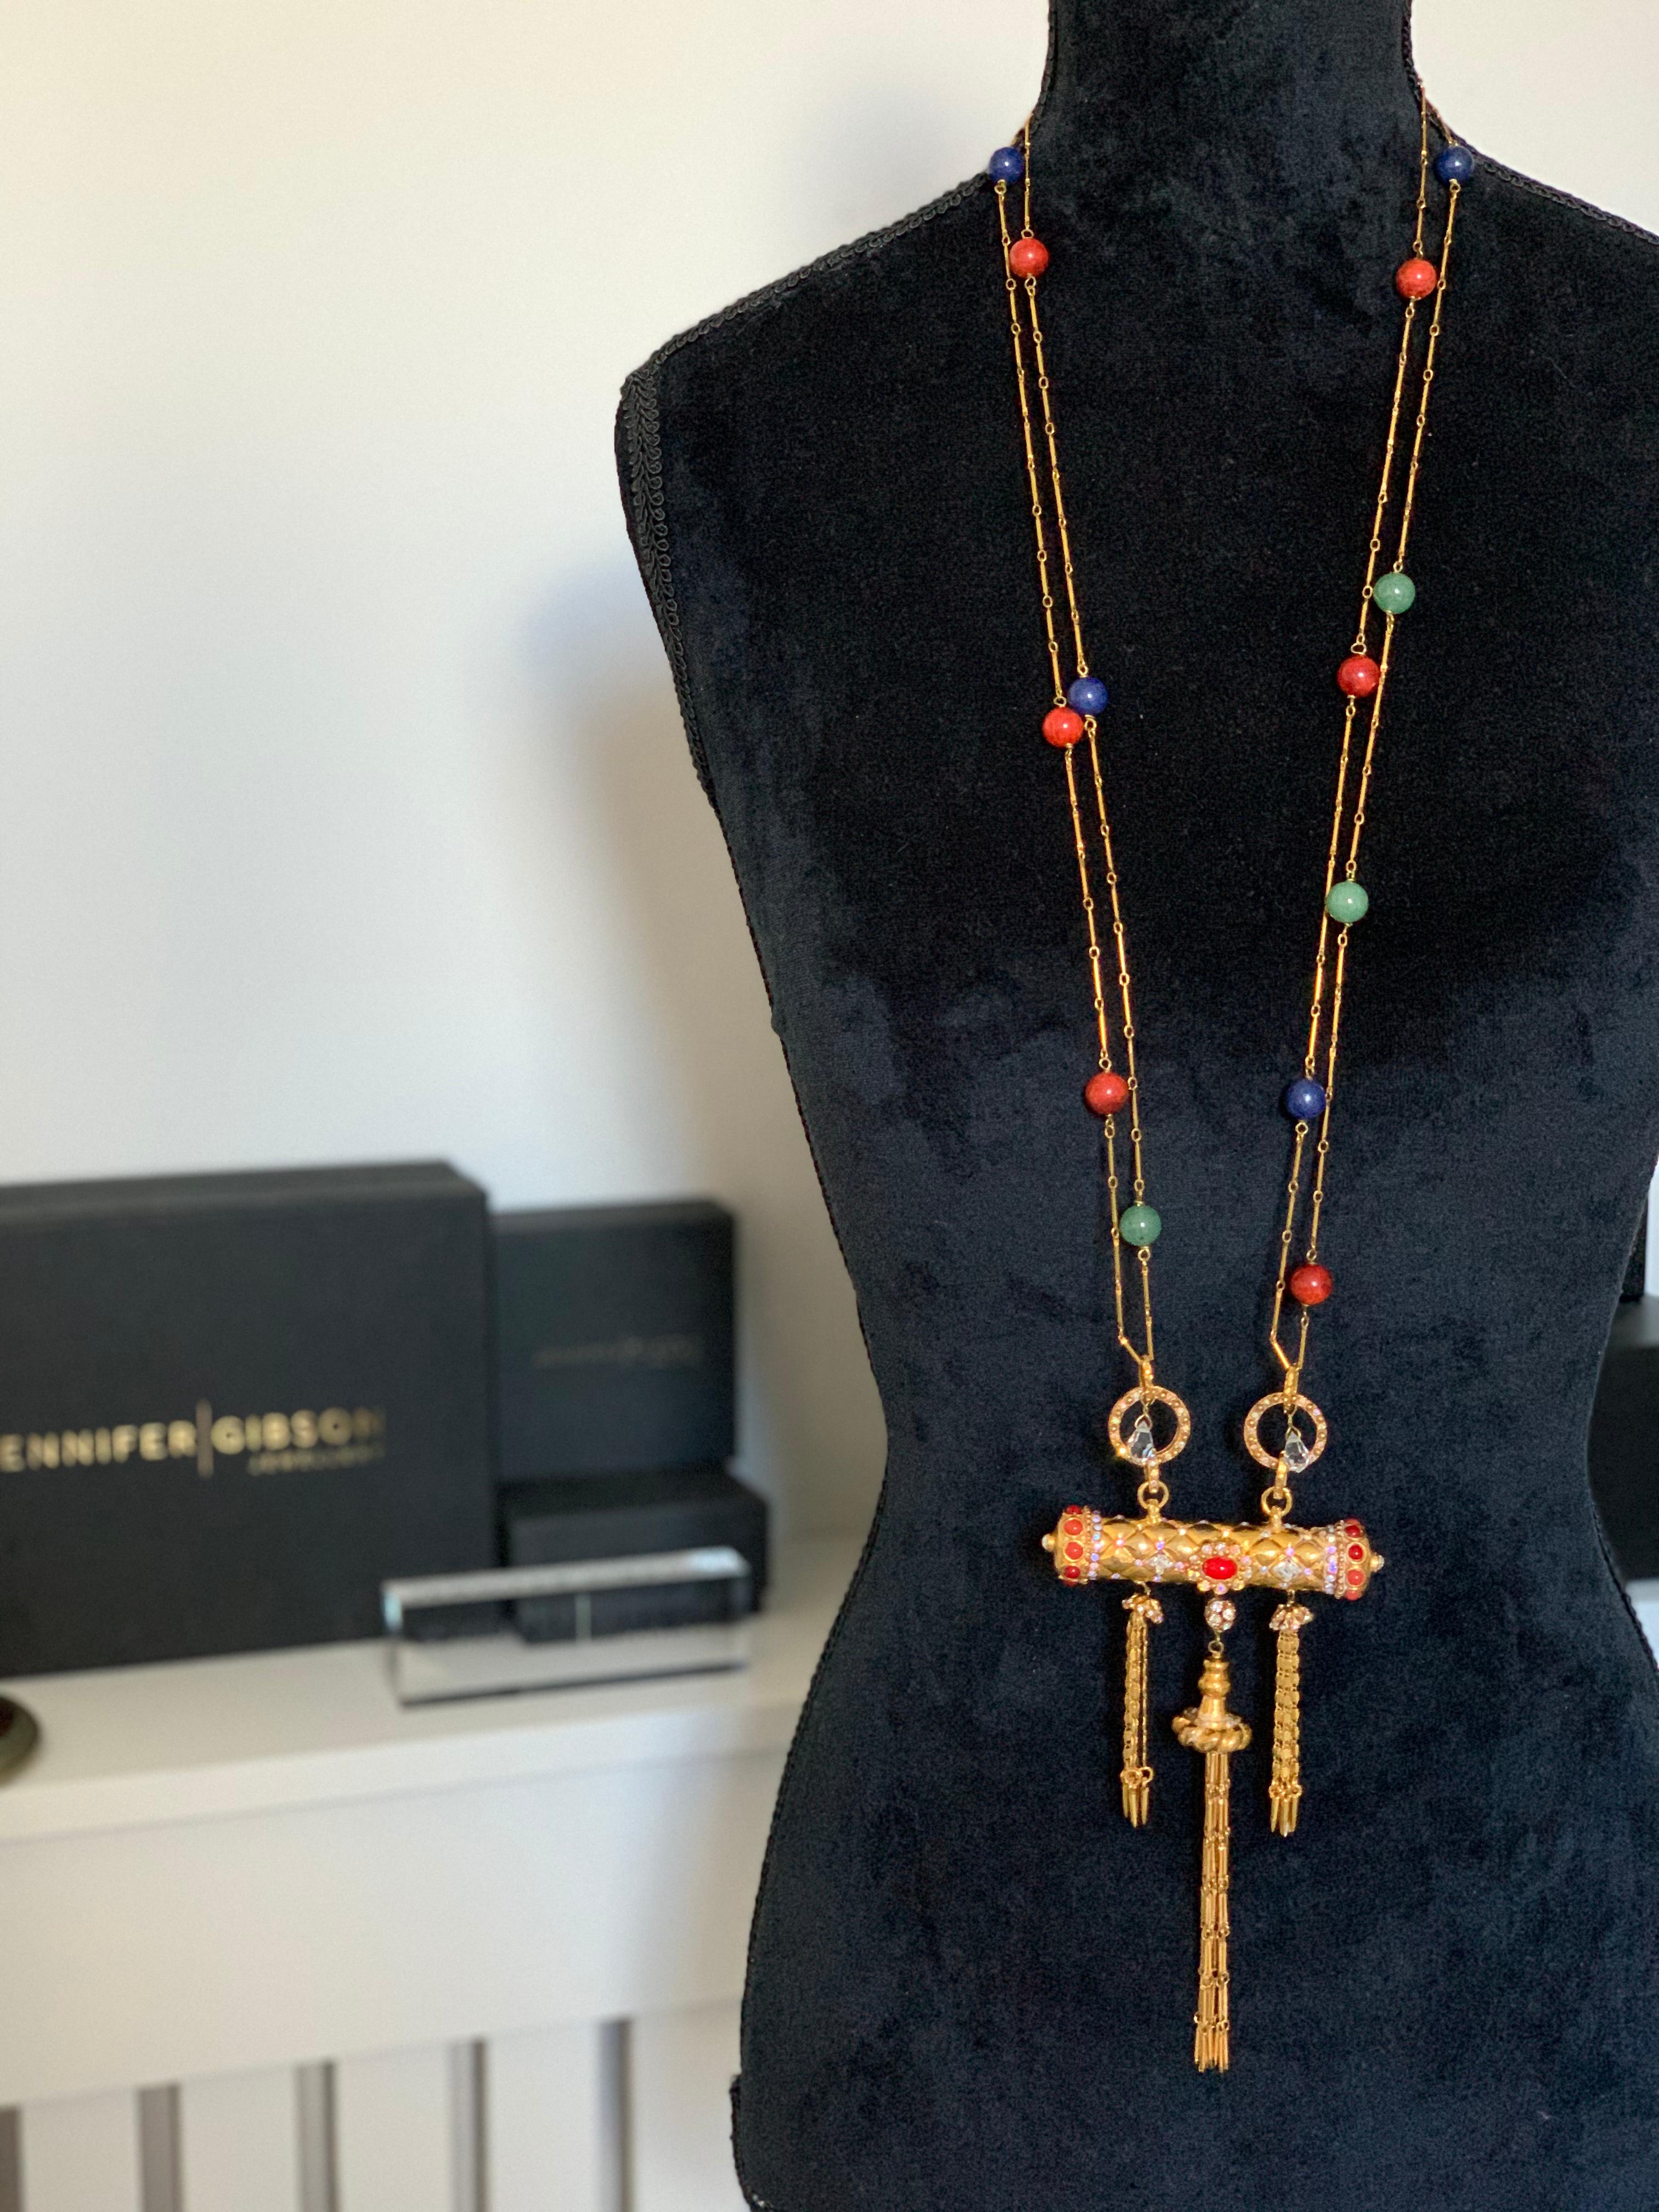 An exceptional Vintage Christian Lacroix Necklace. Featuring gold plated fin bar link chains set with semi precious stone balls leading to the most intensely elaborate statement bar and tassel pendant. The pendant comprises a weighty matelasse